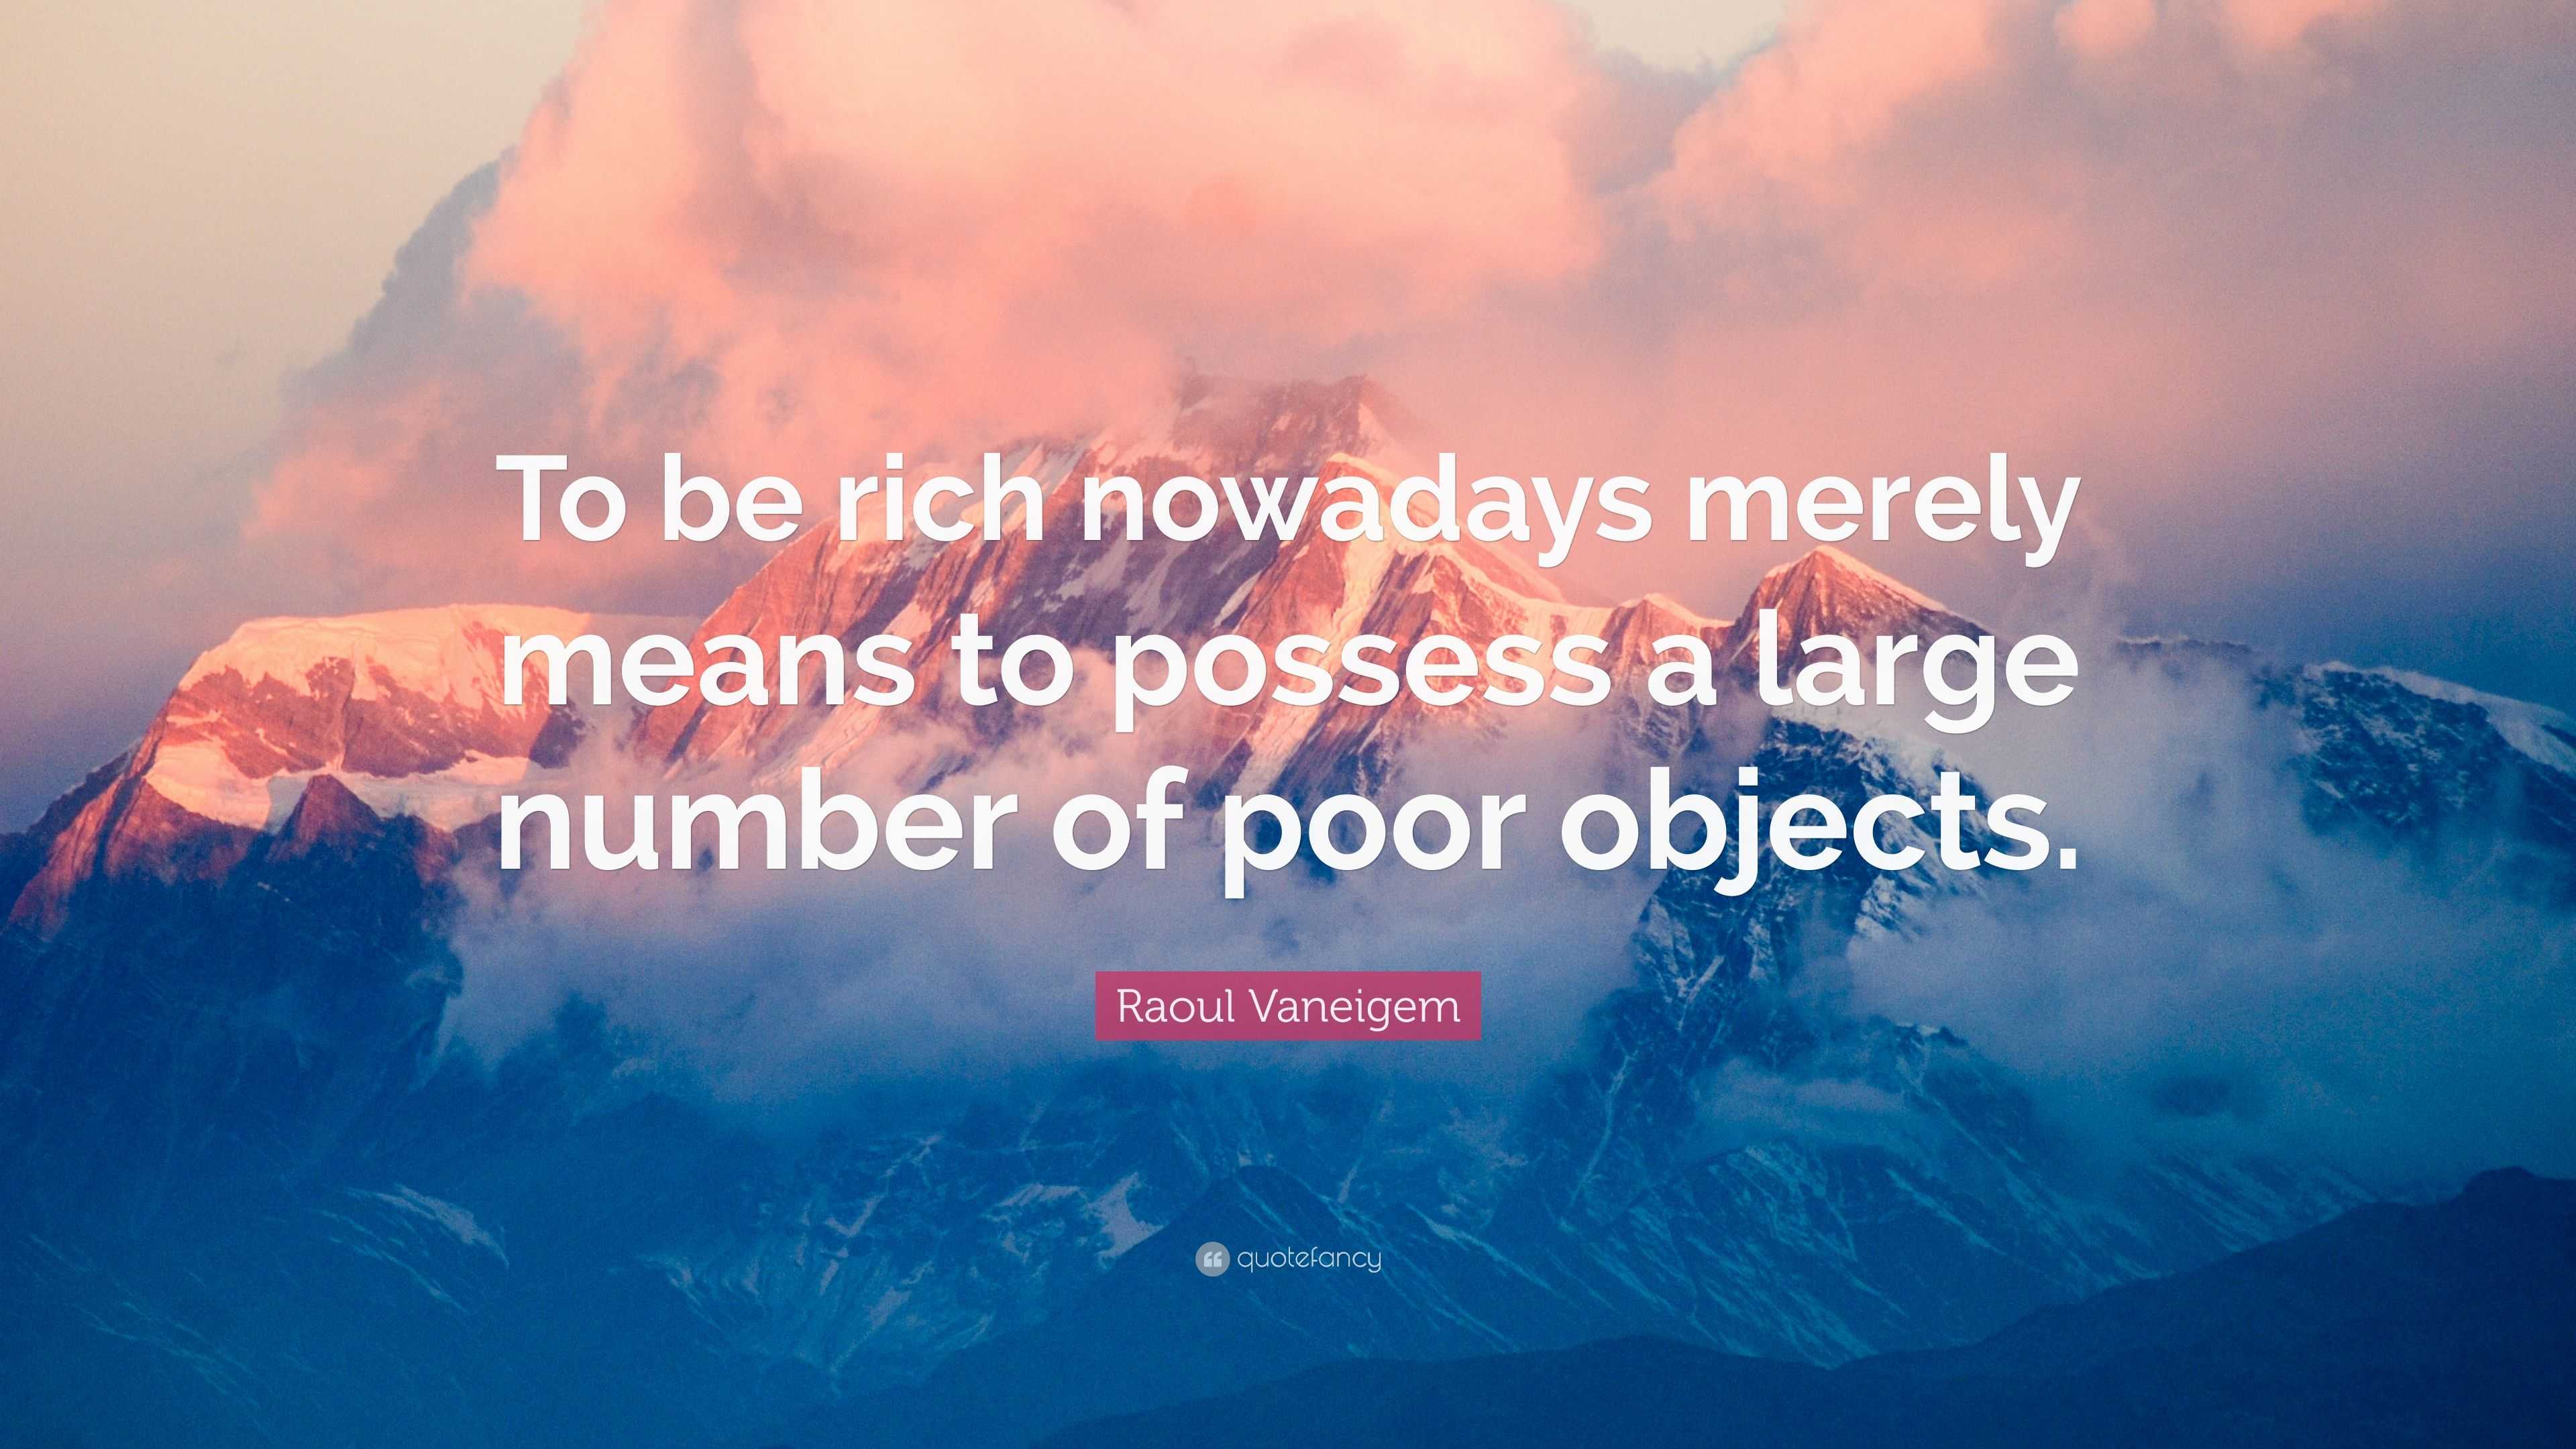 Raoul Vaneigem quote: To be rich nowadays merely means to possess a large